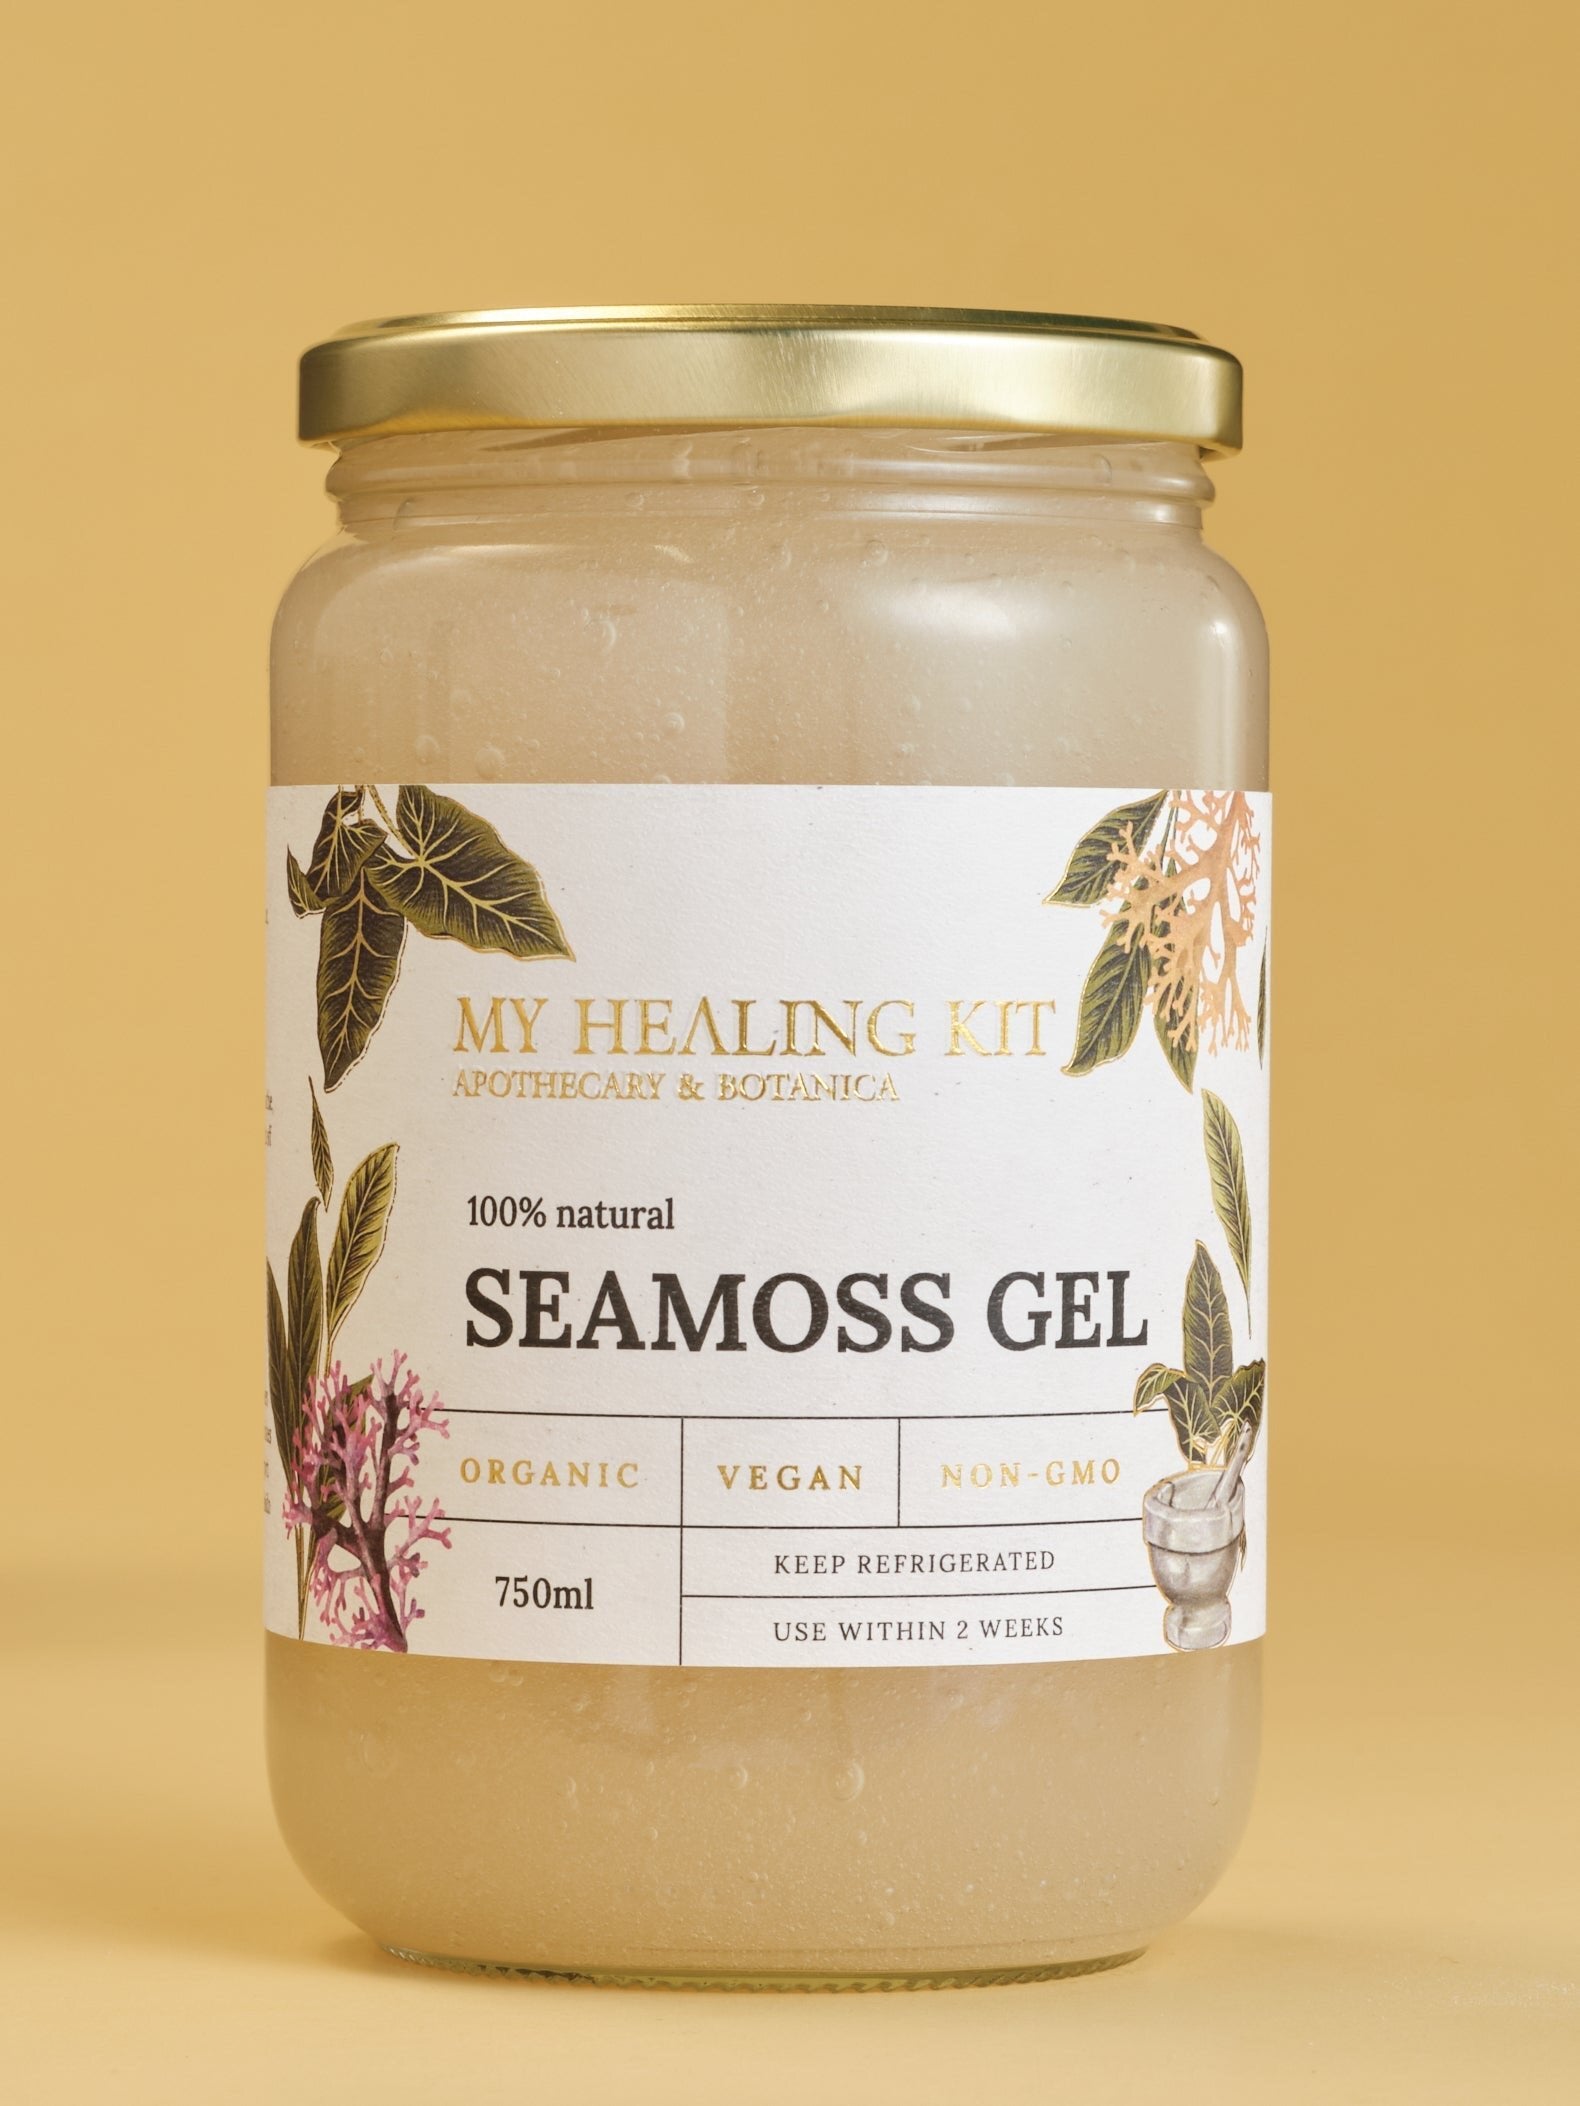 Gold Sea Moss Gel - A natural healing product from MyHealingKit